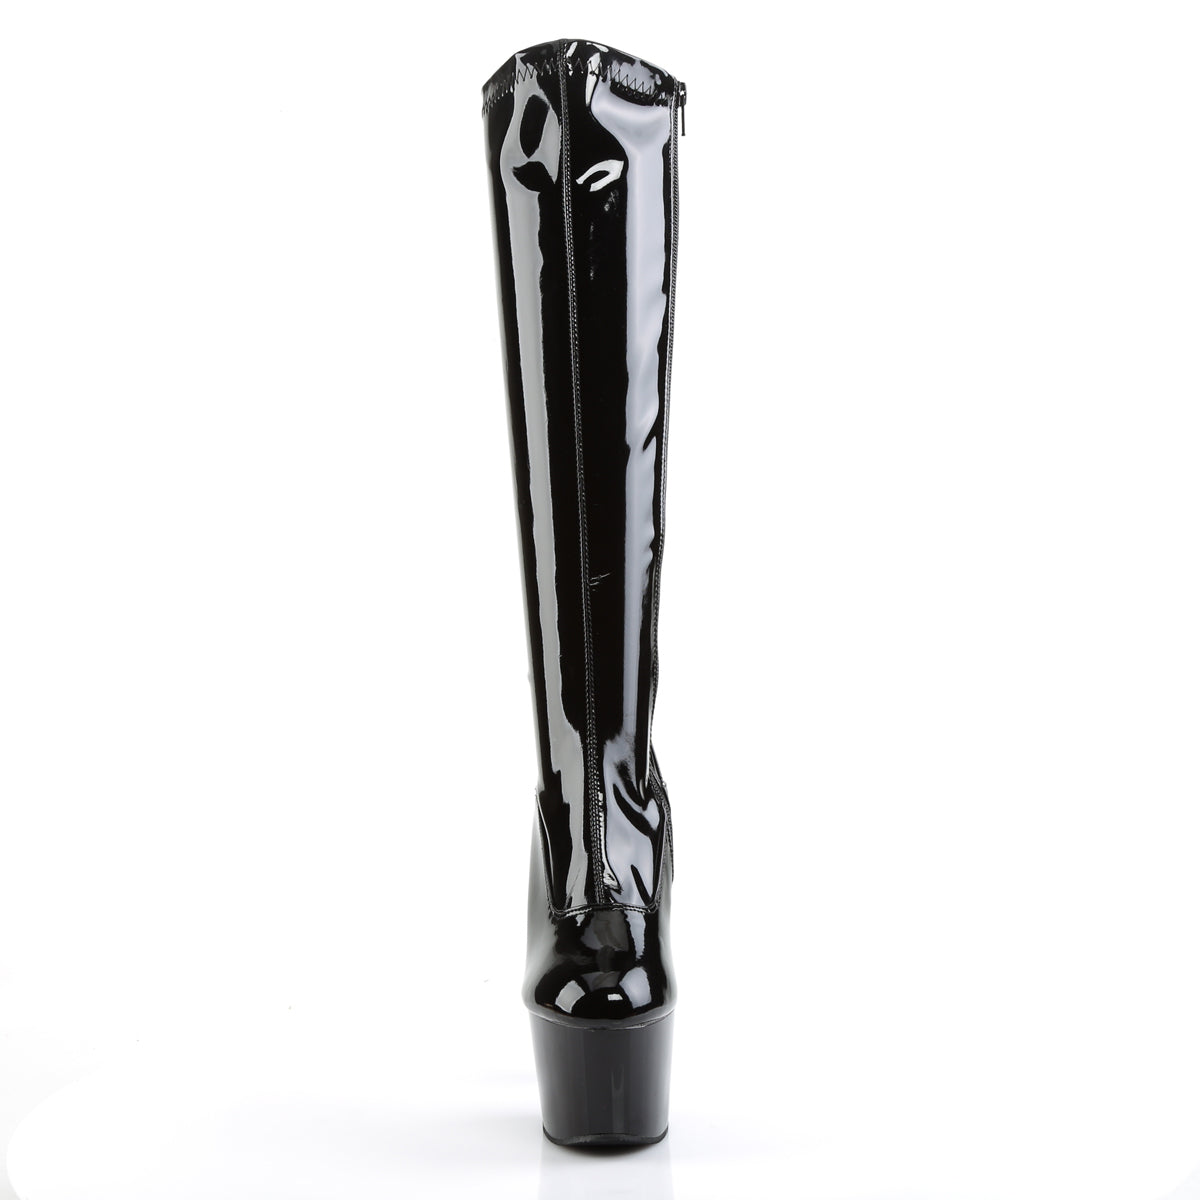 ADORE-2000 / B / M 7 "PLEASER FAST DELIVERY 24-48h 